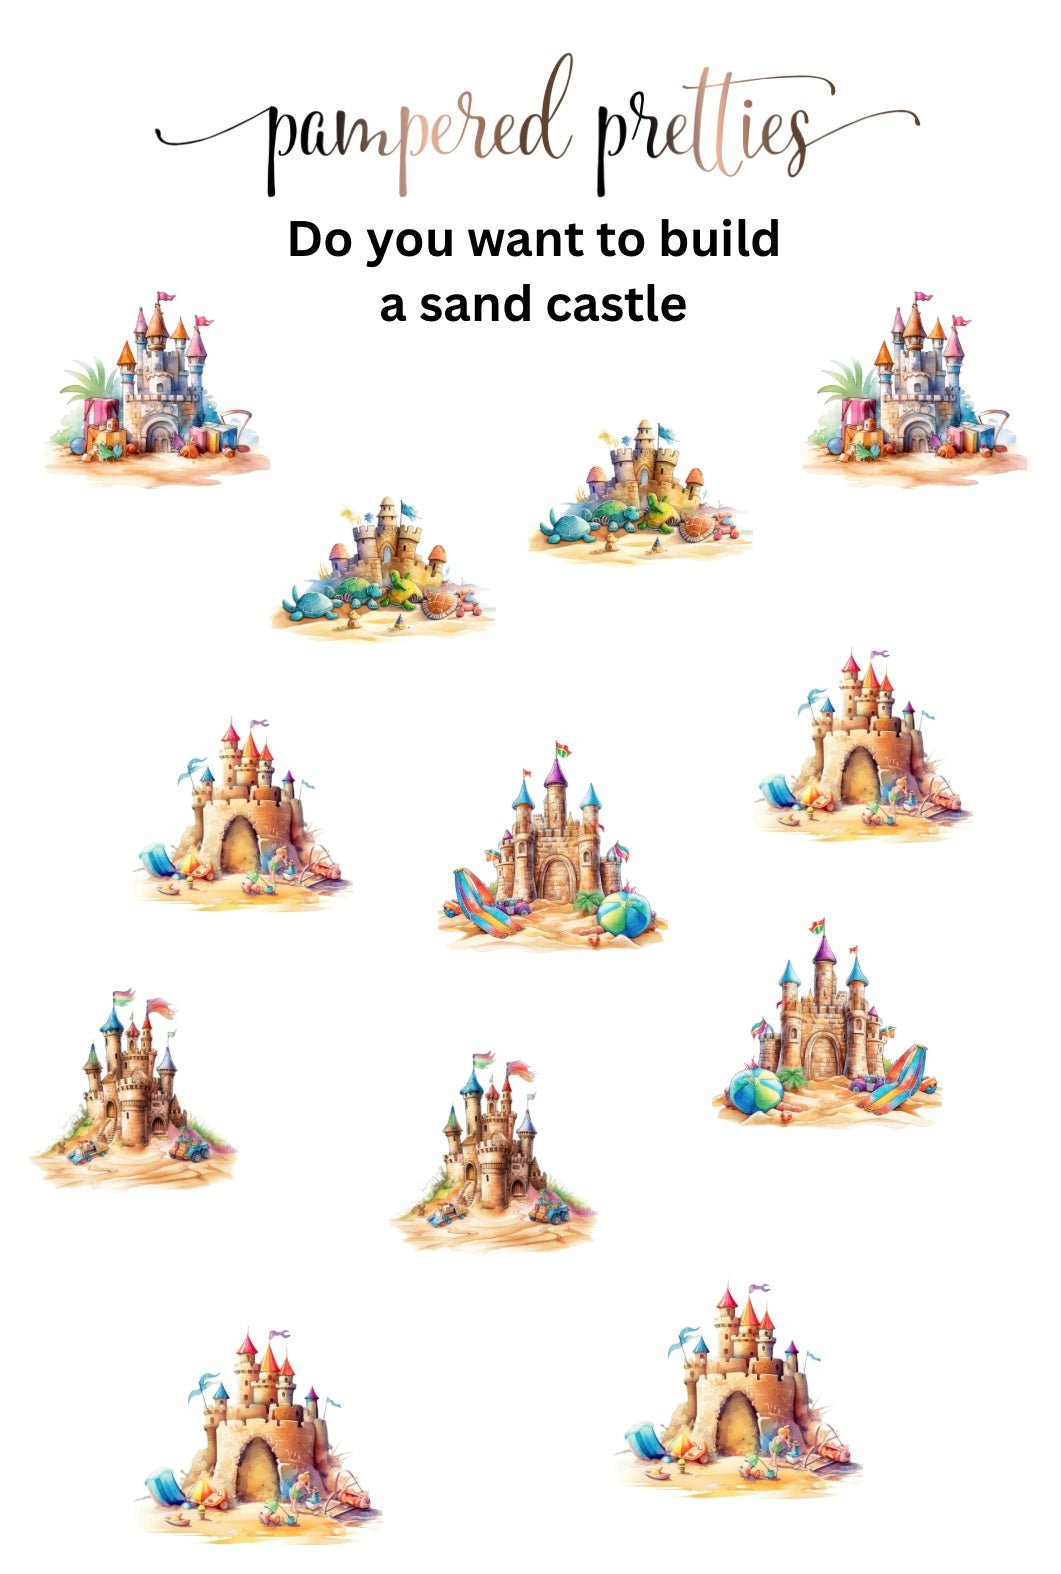 Midi Pretty - Do You Want To Build A Sand Castle? - Pampered Pretties